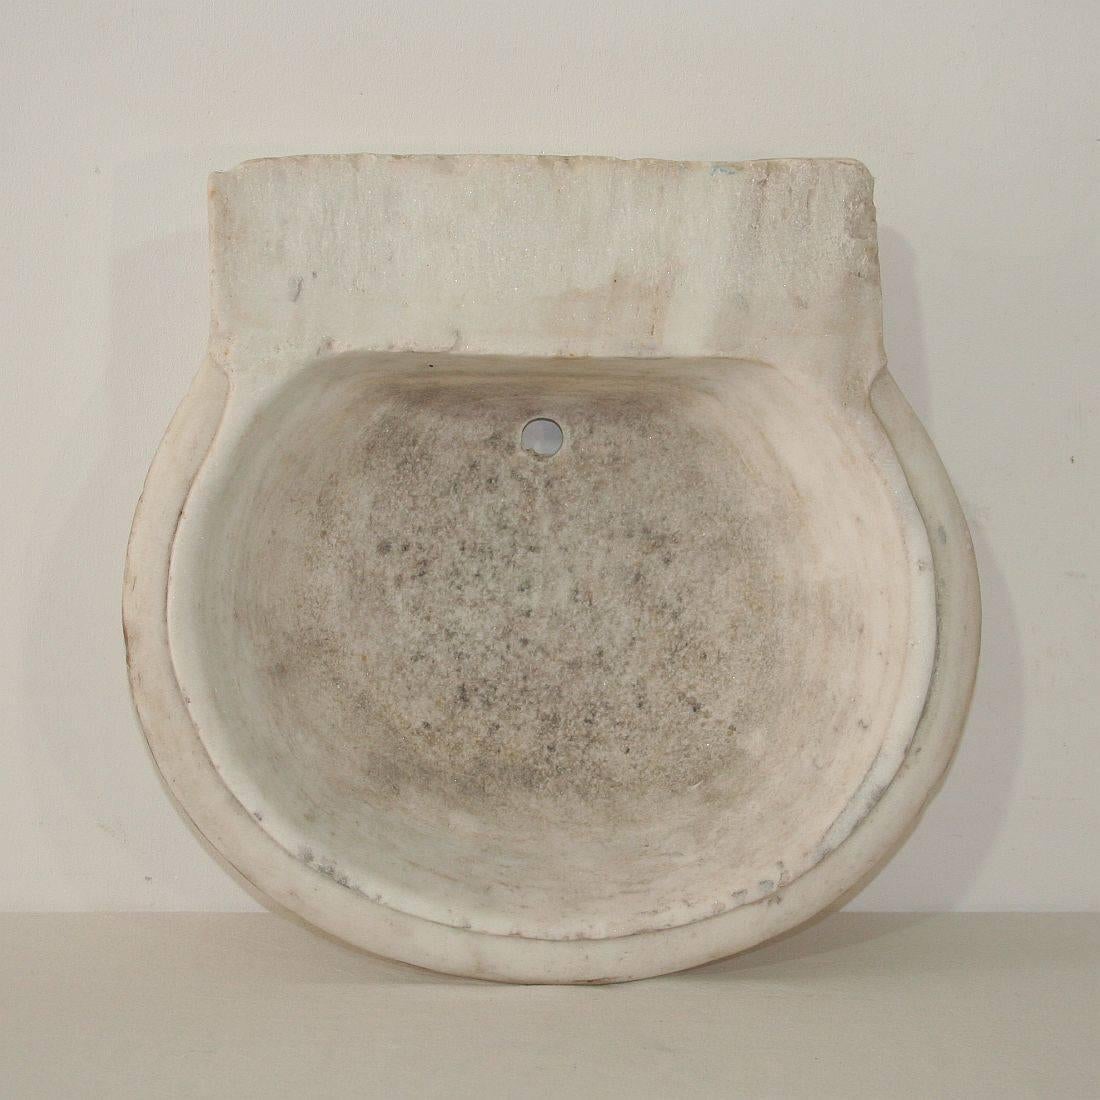 Beautiful hand-carved white marble water basin or sink, Italy, circa 1750-1800. Weathered.